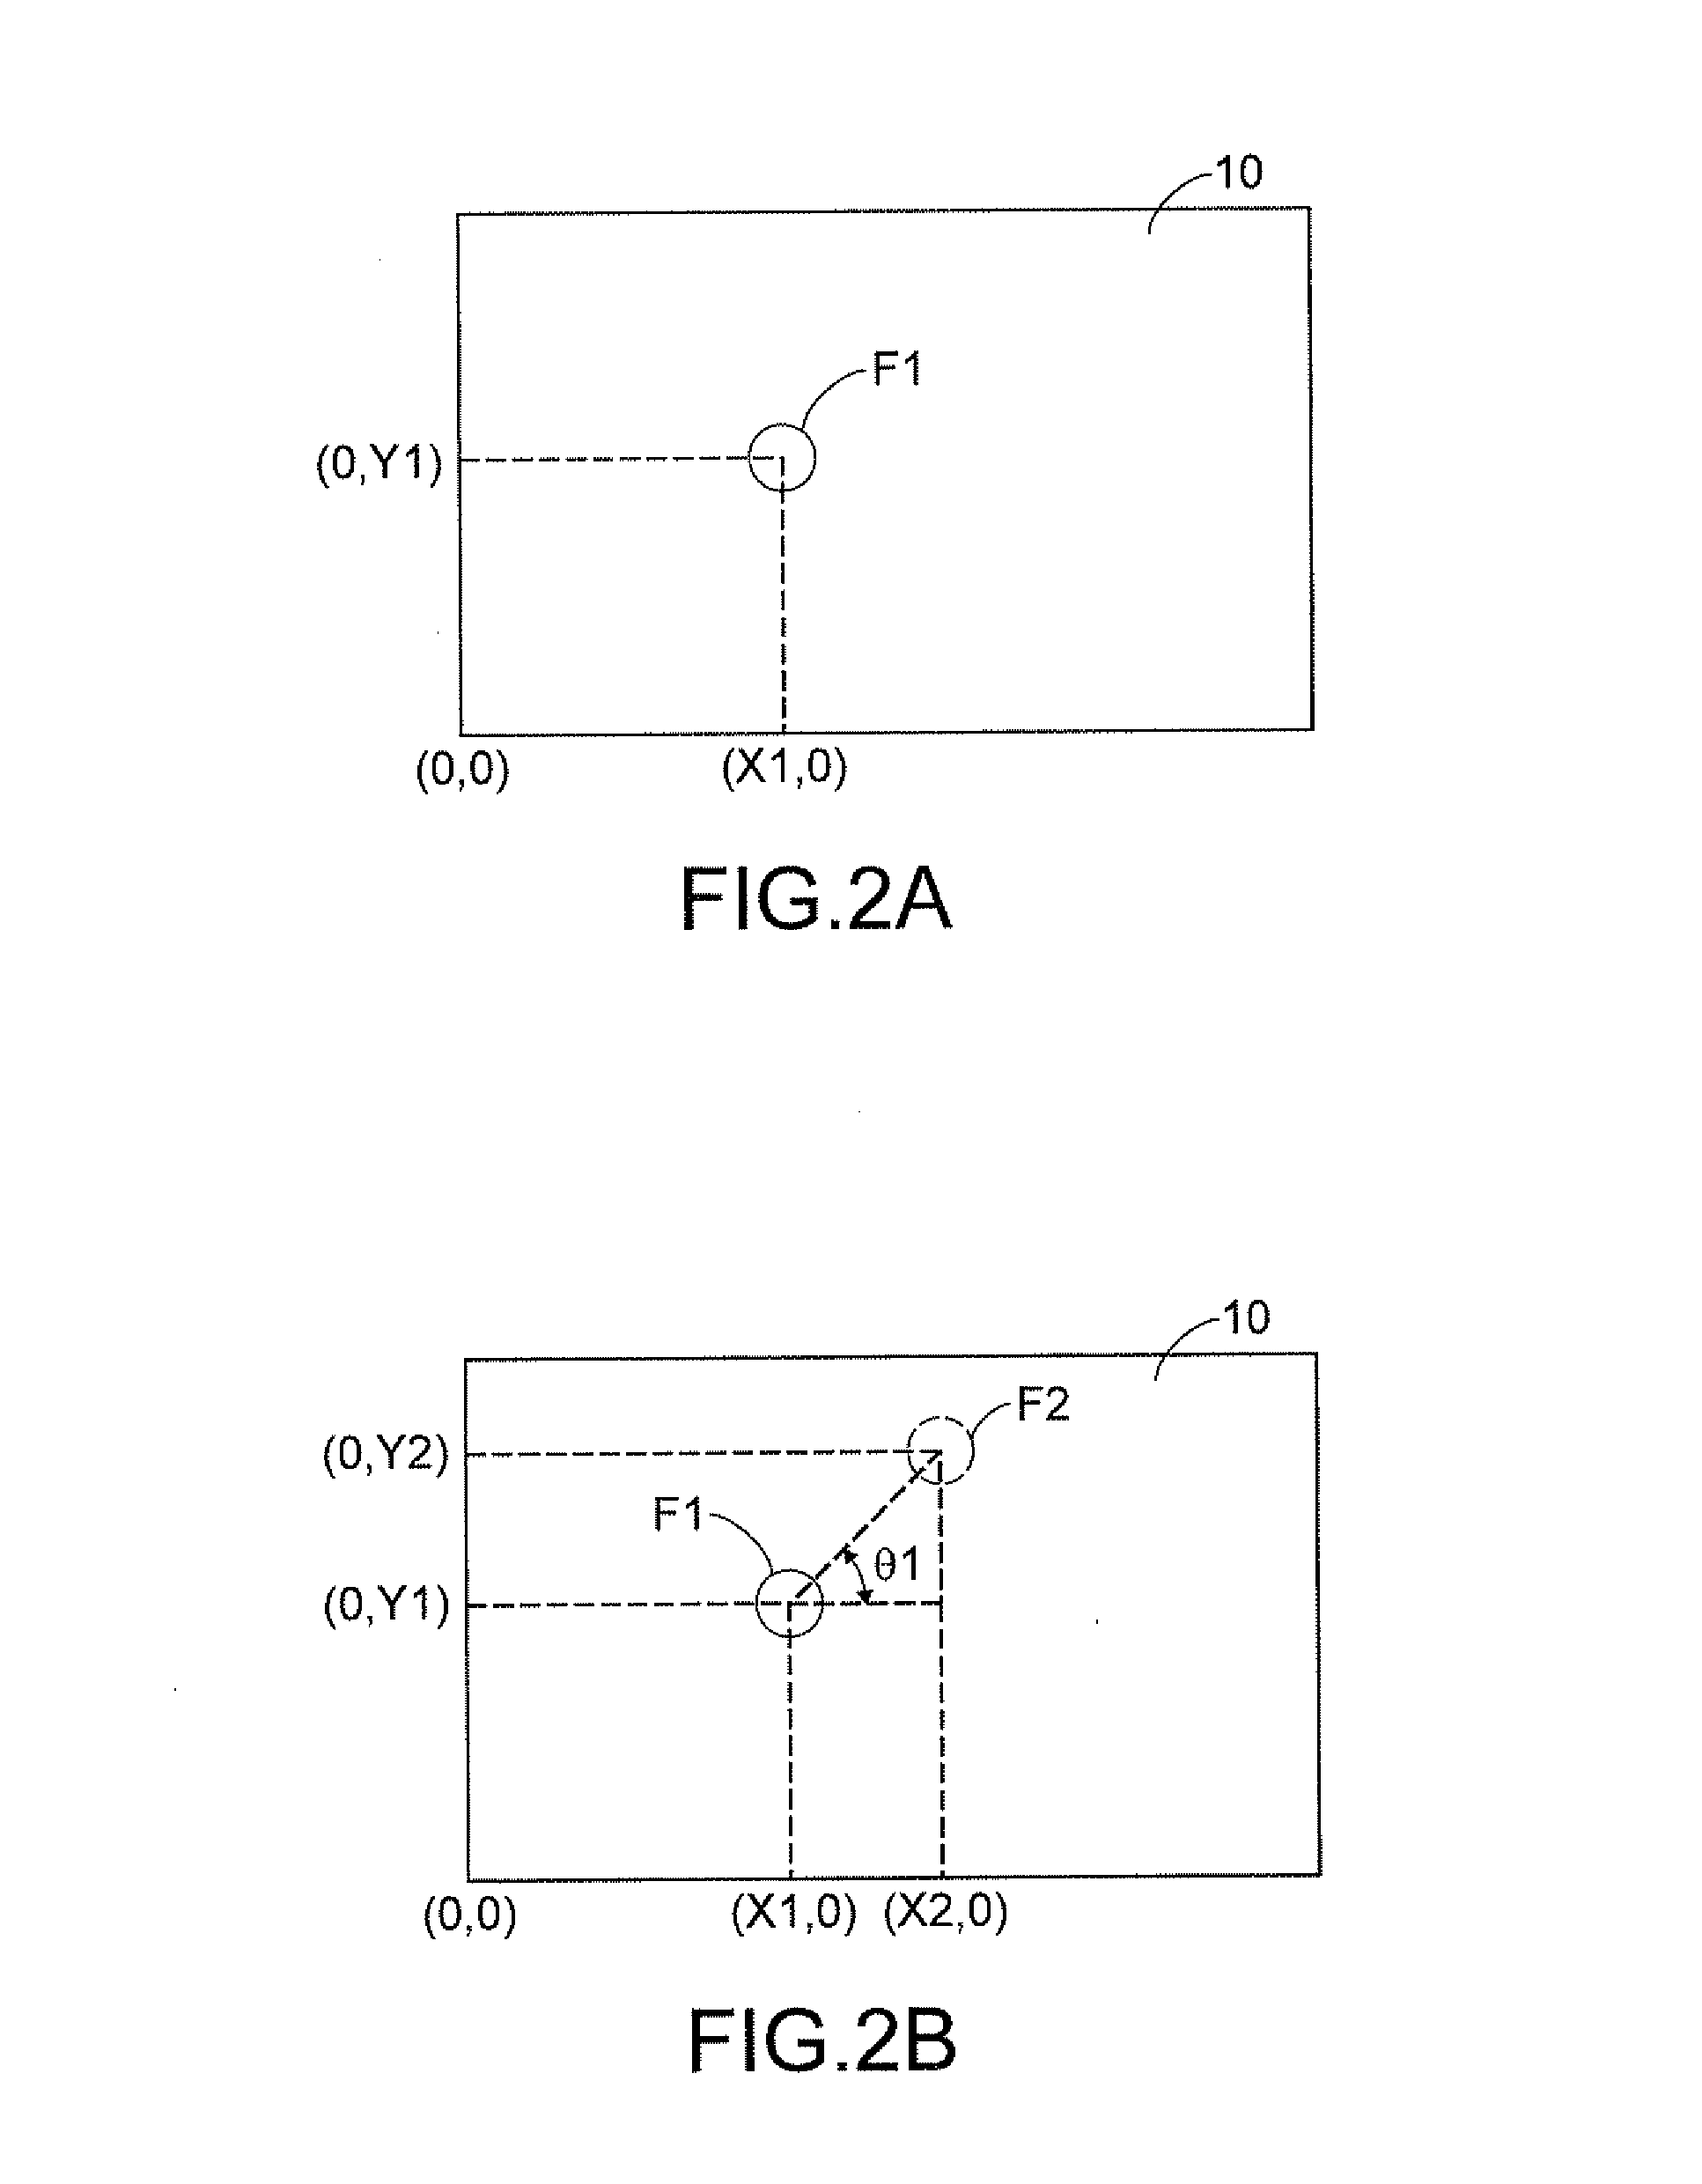 Touch pad operable with multi-objects and method of operating same